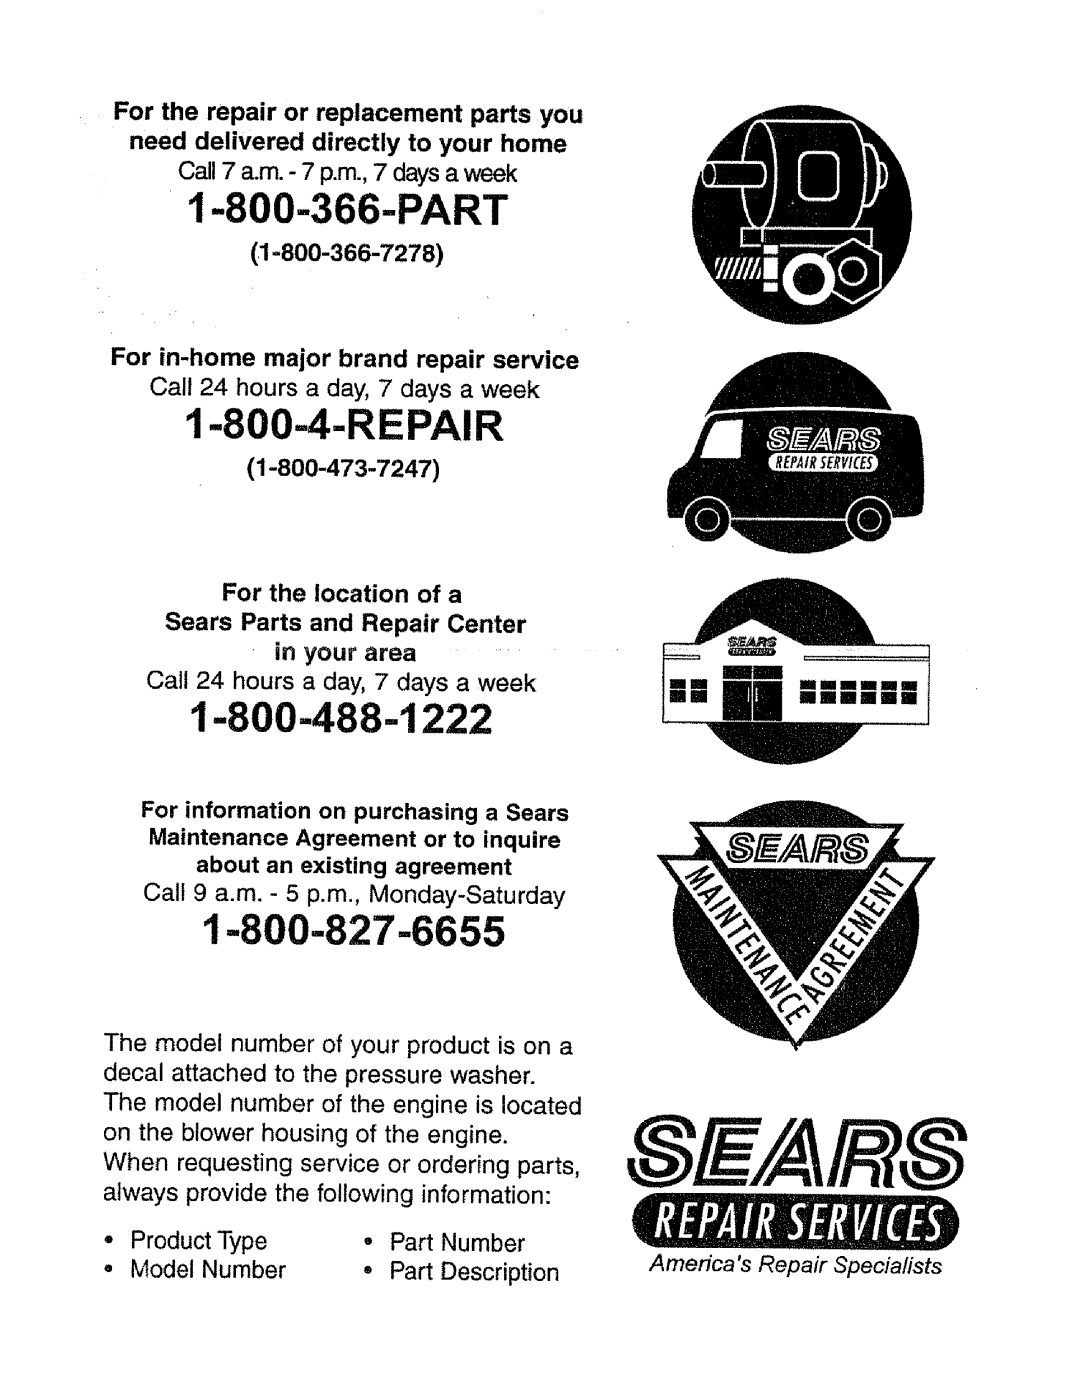 Sears 580.761652 For in-homemajor brand repair service, Call 24 hours a day, 7 clays a week, For the location of a, Part 